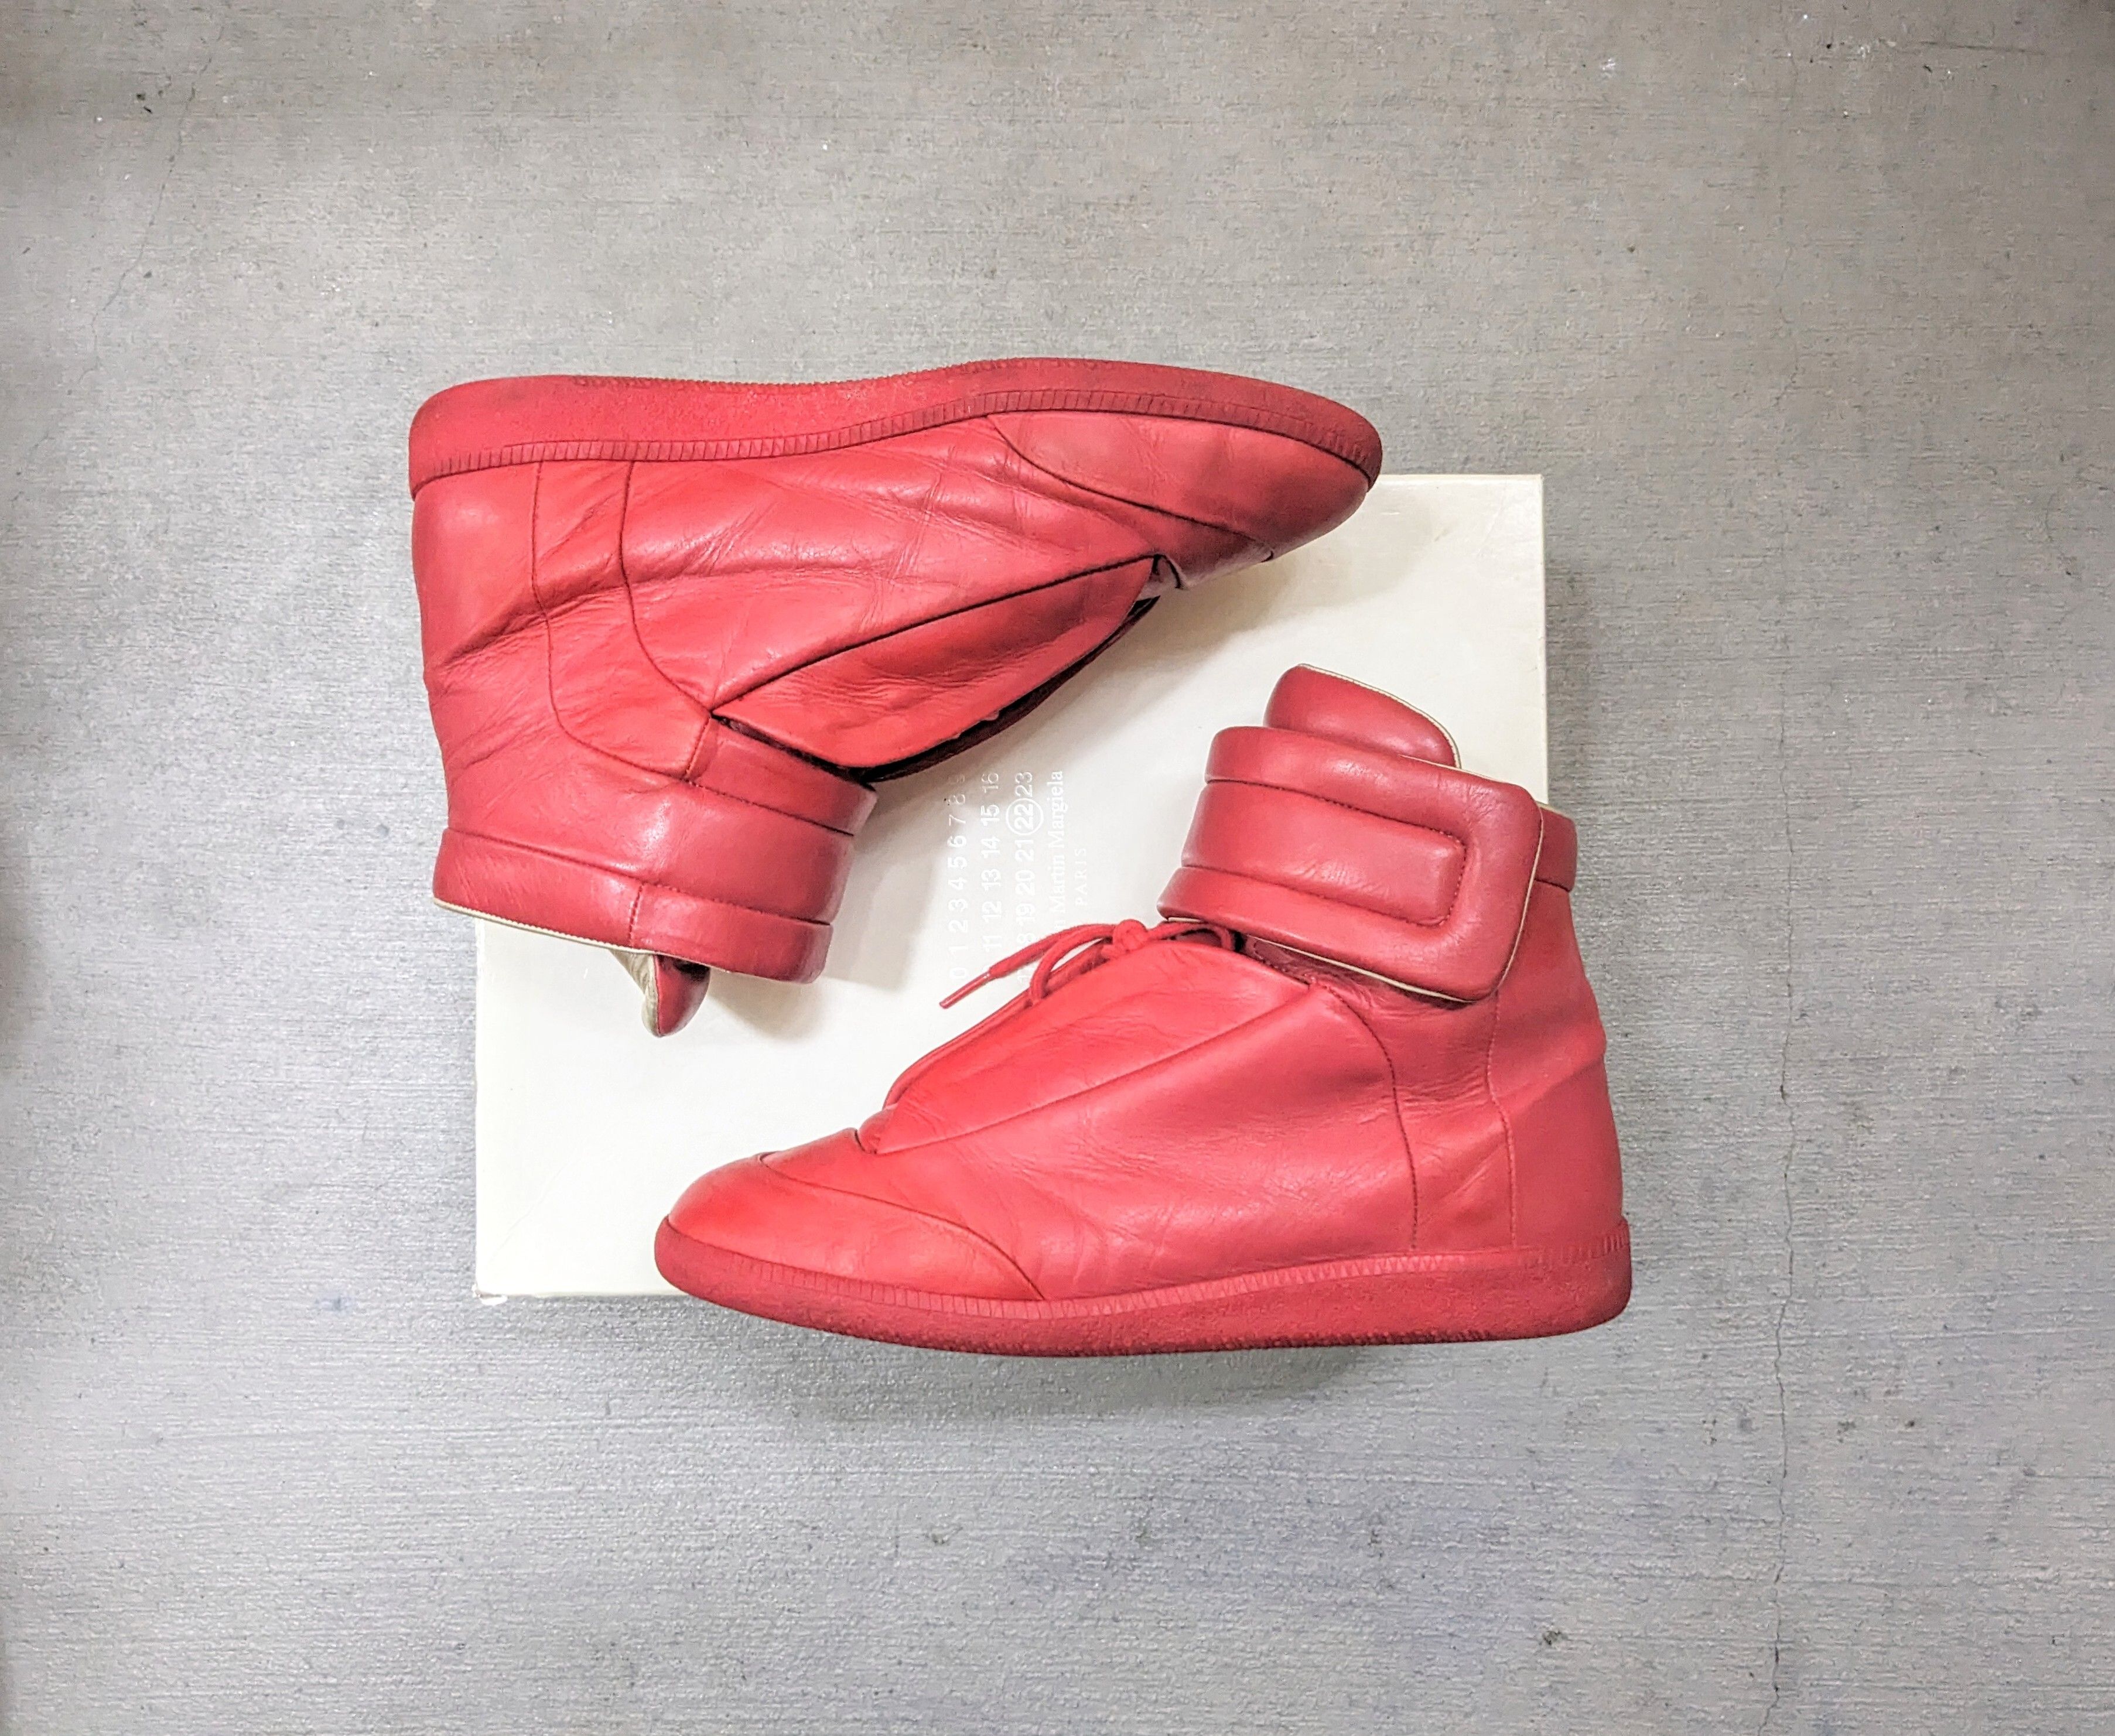 Pre-owned Maison Margiela Future Red 10.5 43.5 Leather High Tops Shoes